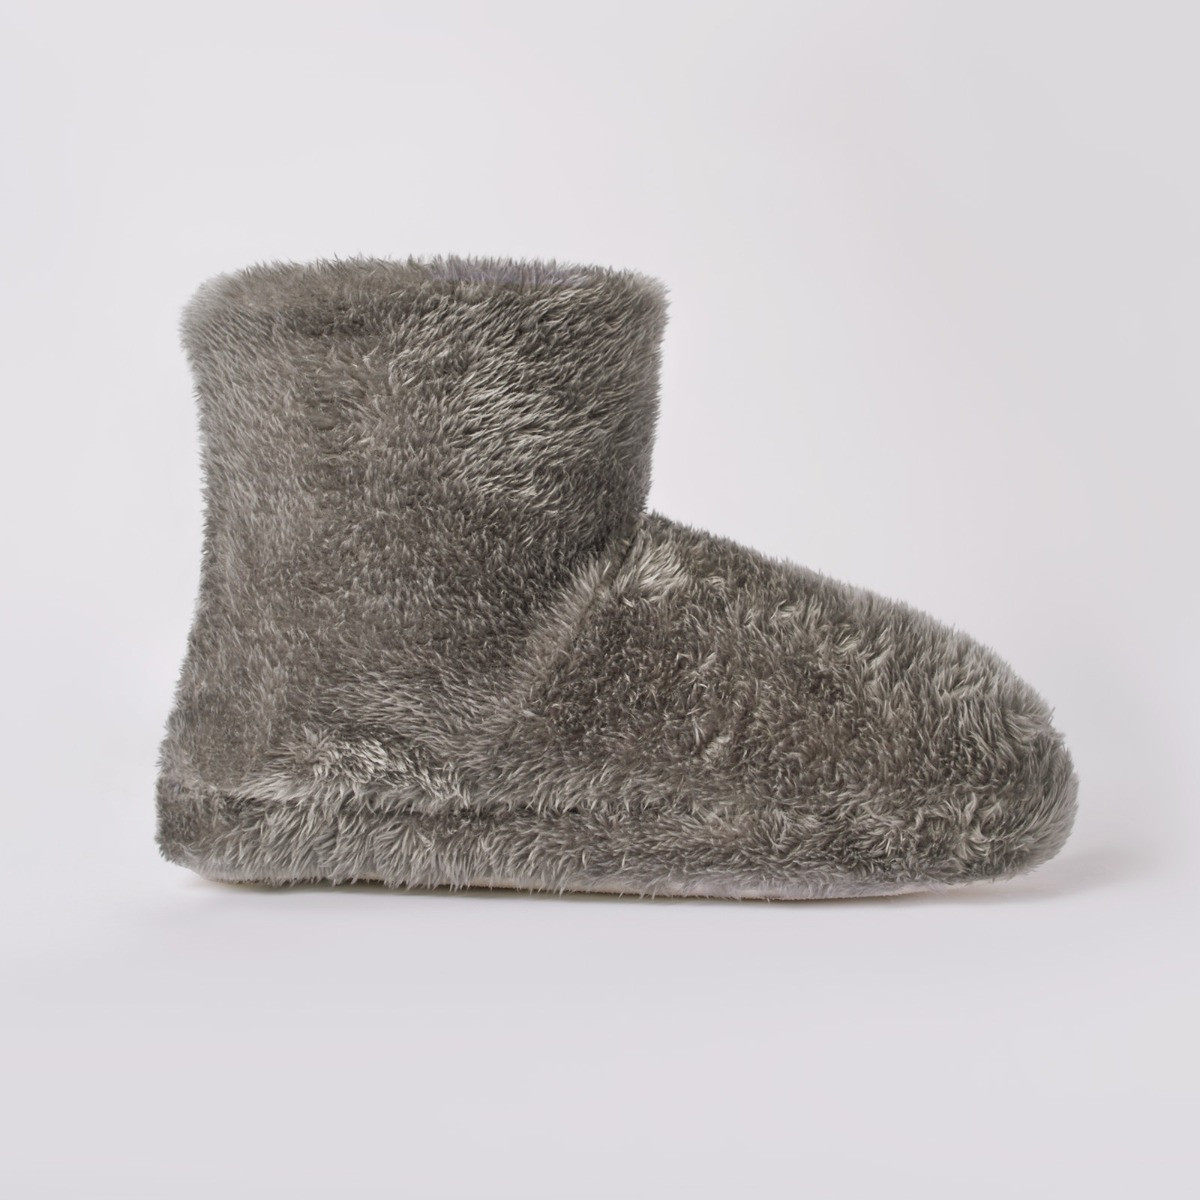 OHS Teddy Boot Slippers, Grey - Large>